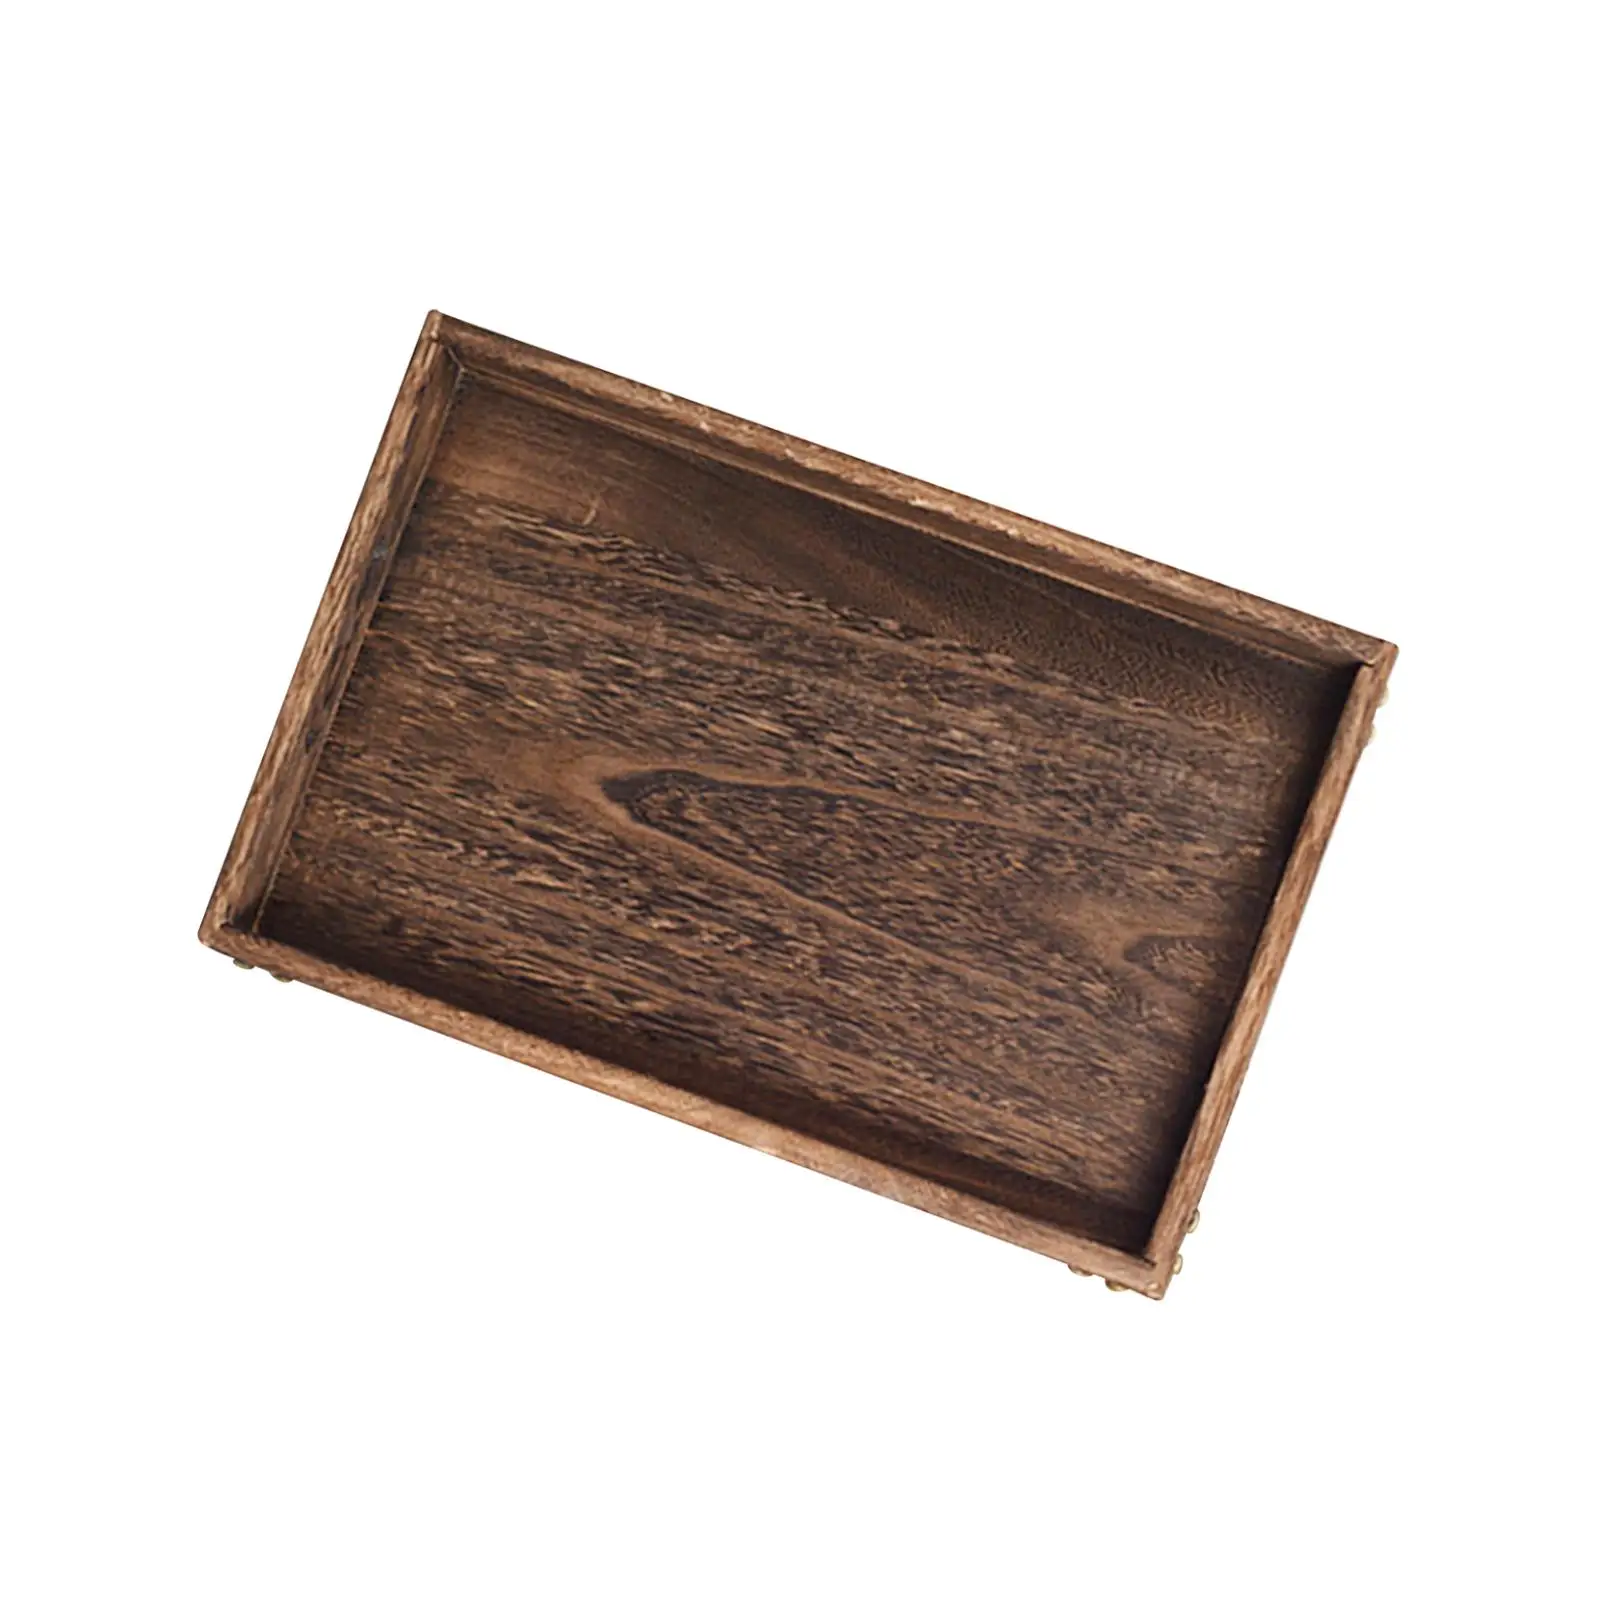 Rustic Wood Serving Tray Platter Food Trays Convenient Lightweight for Breakfast Sofa Couch Tray Rectangular Multipurpose